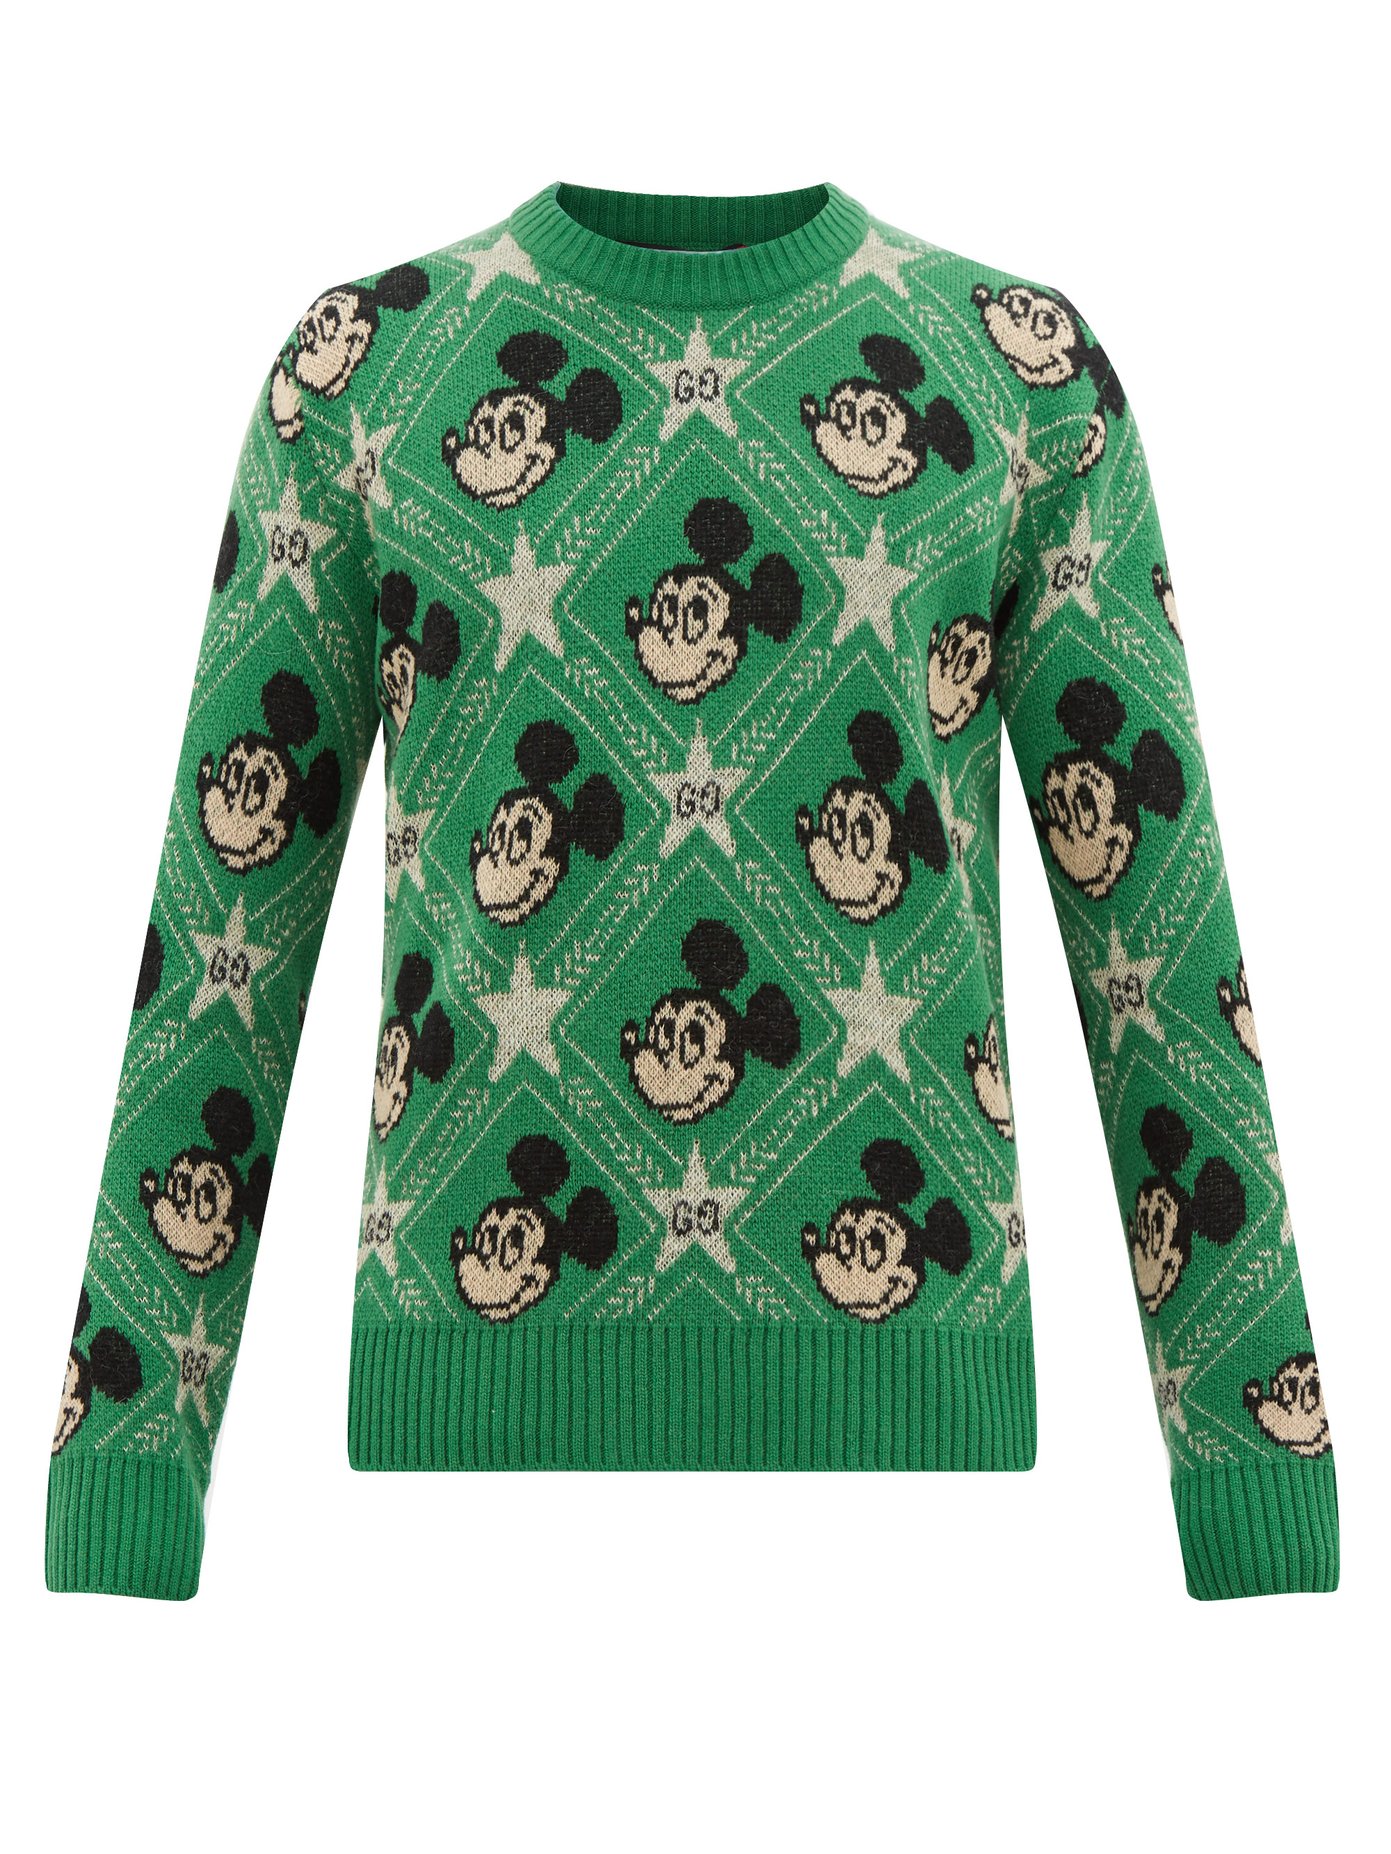 gucci mickey mouse sweater